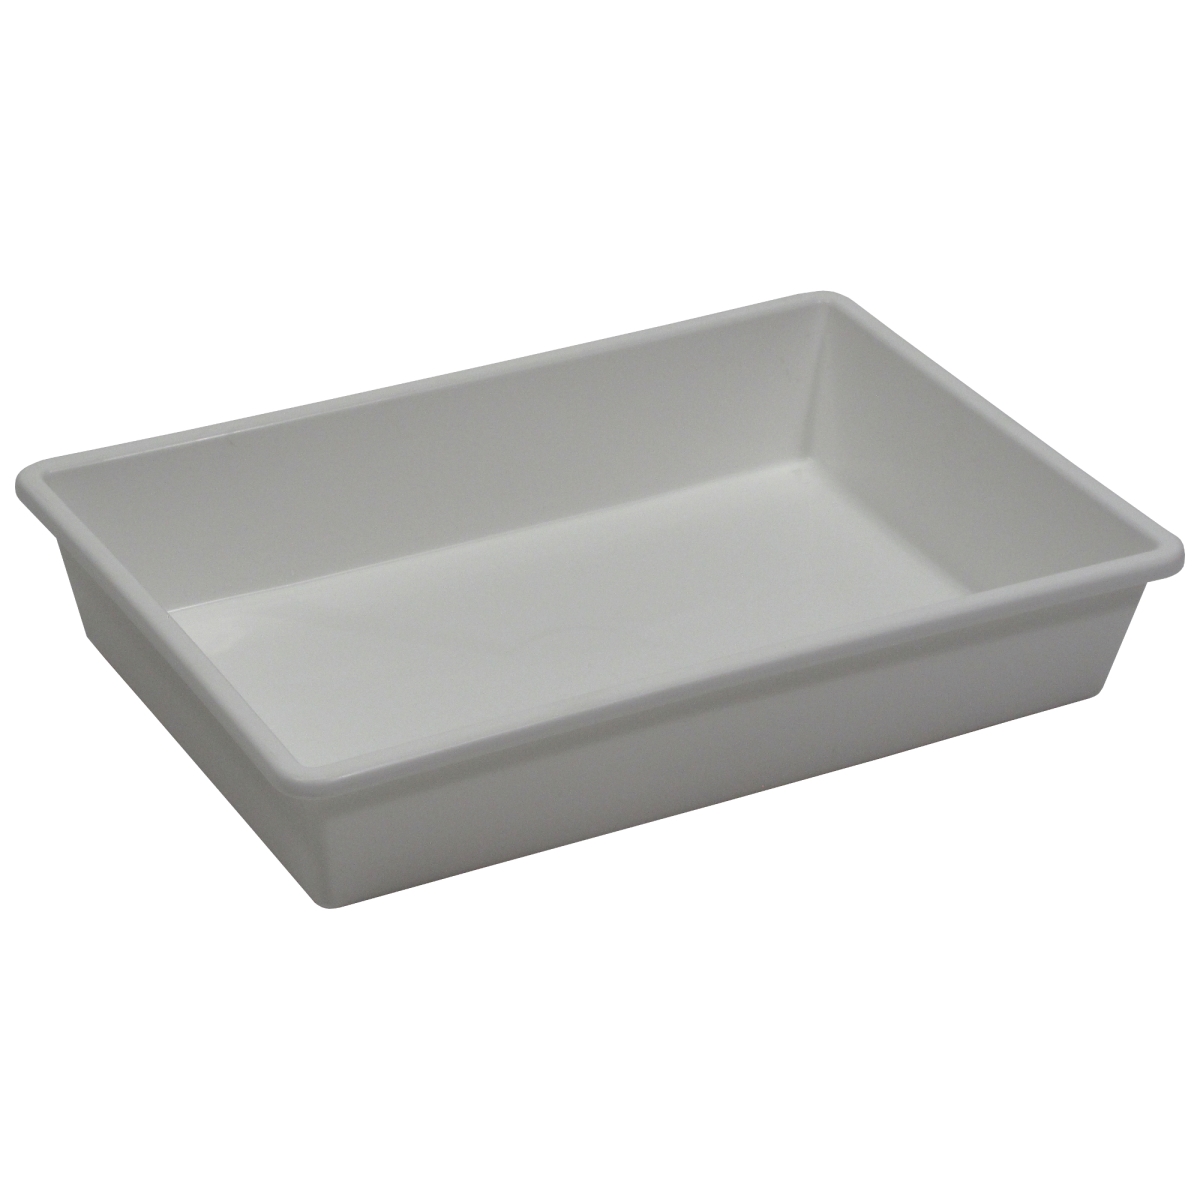 7428wh 6 Litre & 1.6 Gal Heavy Duty Tray, White